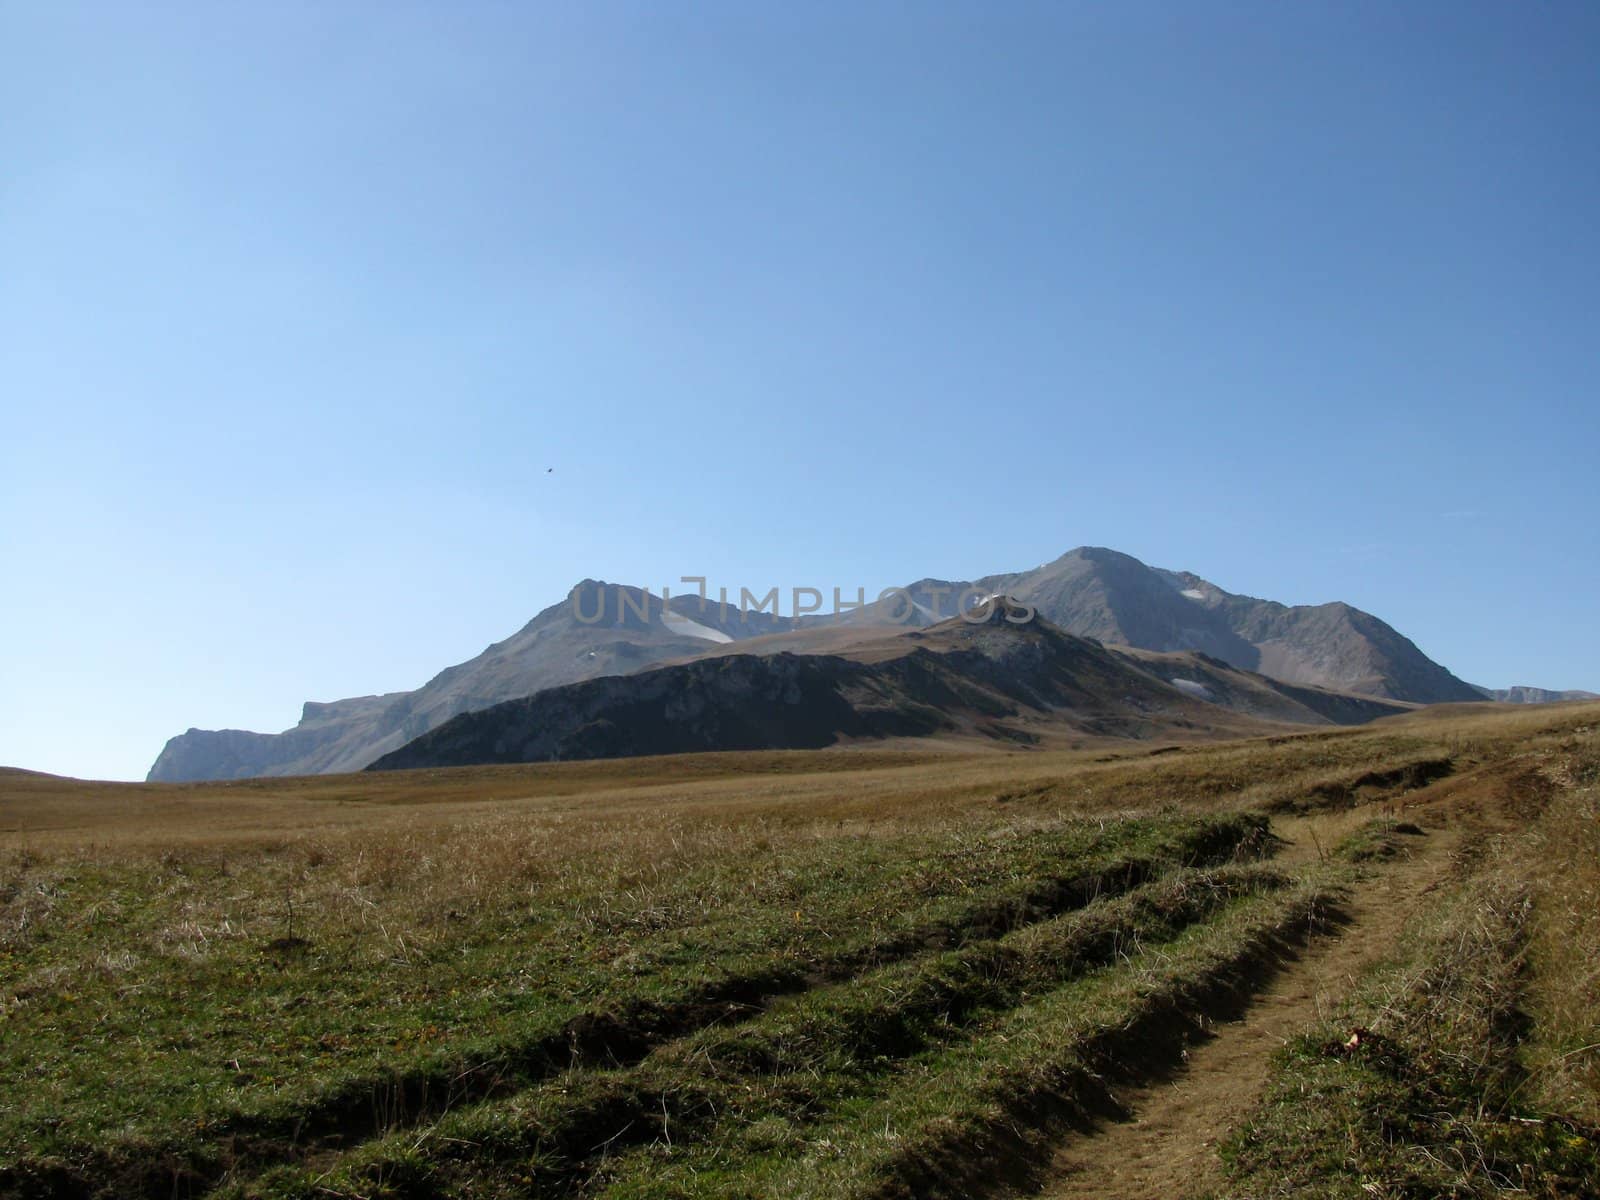 Mountains, caucasus, rocks, a relief, a landscape, the nature, a panorama, a landscape, a ridge, top, breed, the sky, reserve, a background, a kind, a route, the Alpine meadows, a glacier, snow, a track, a slope, peak, beauty, bright, a file, a grass, tourism, travel, autumnt